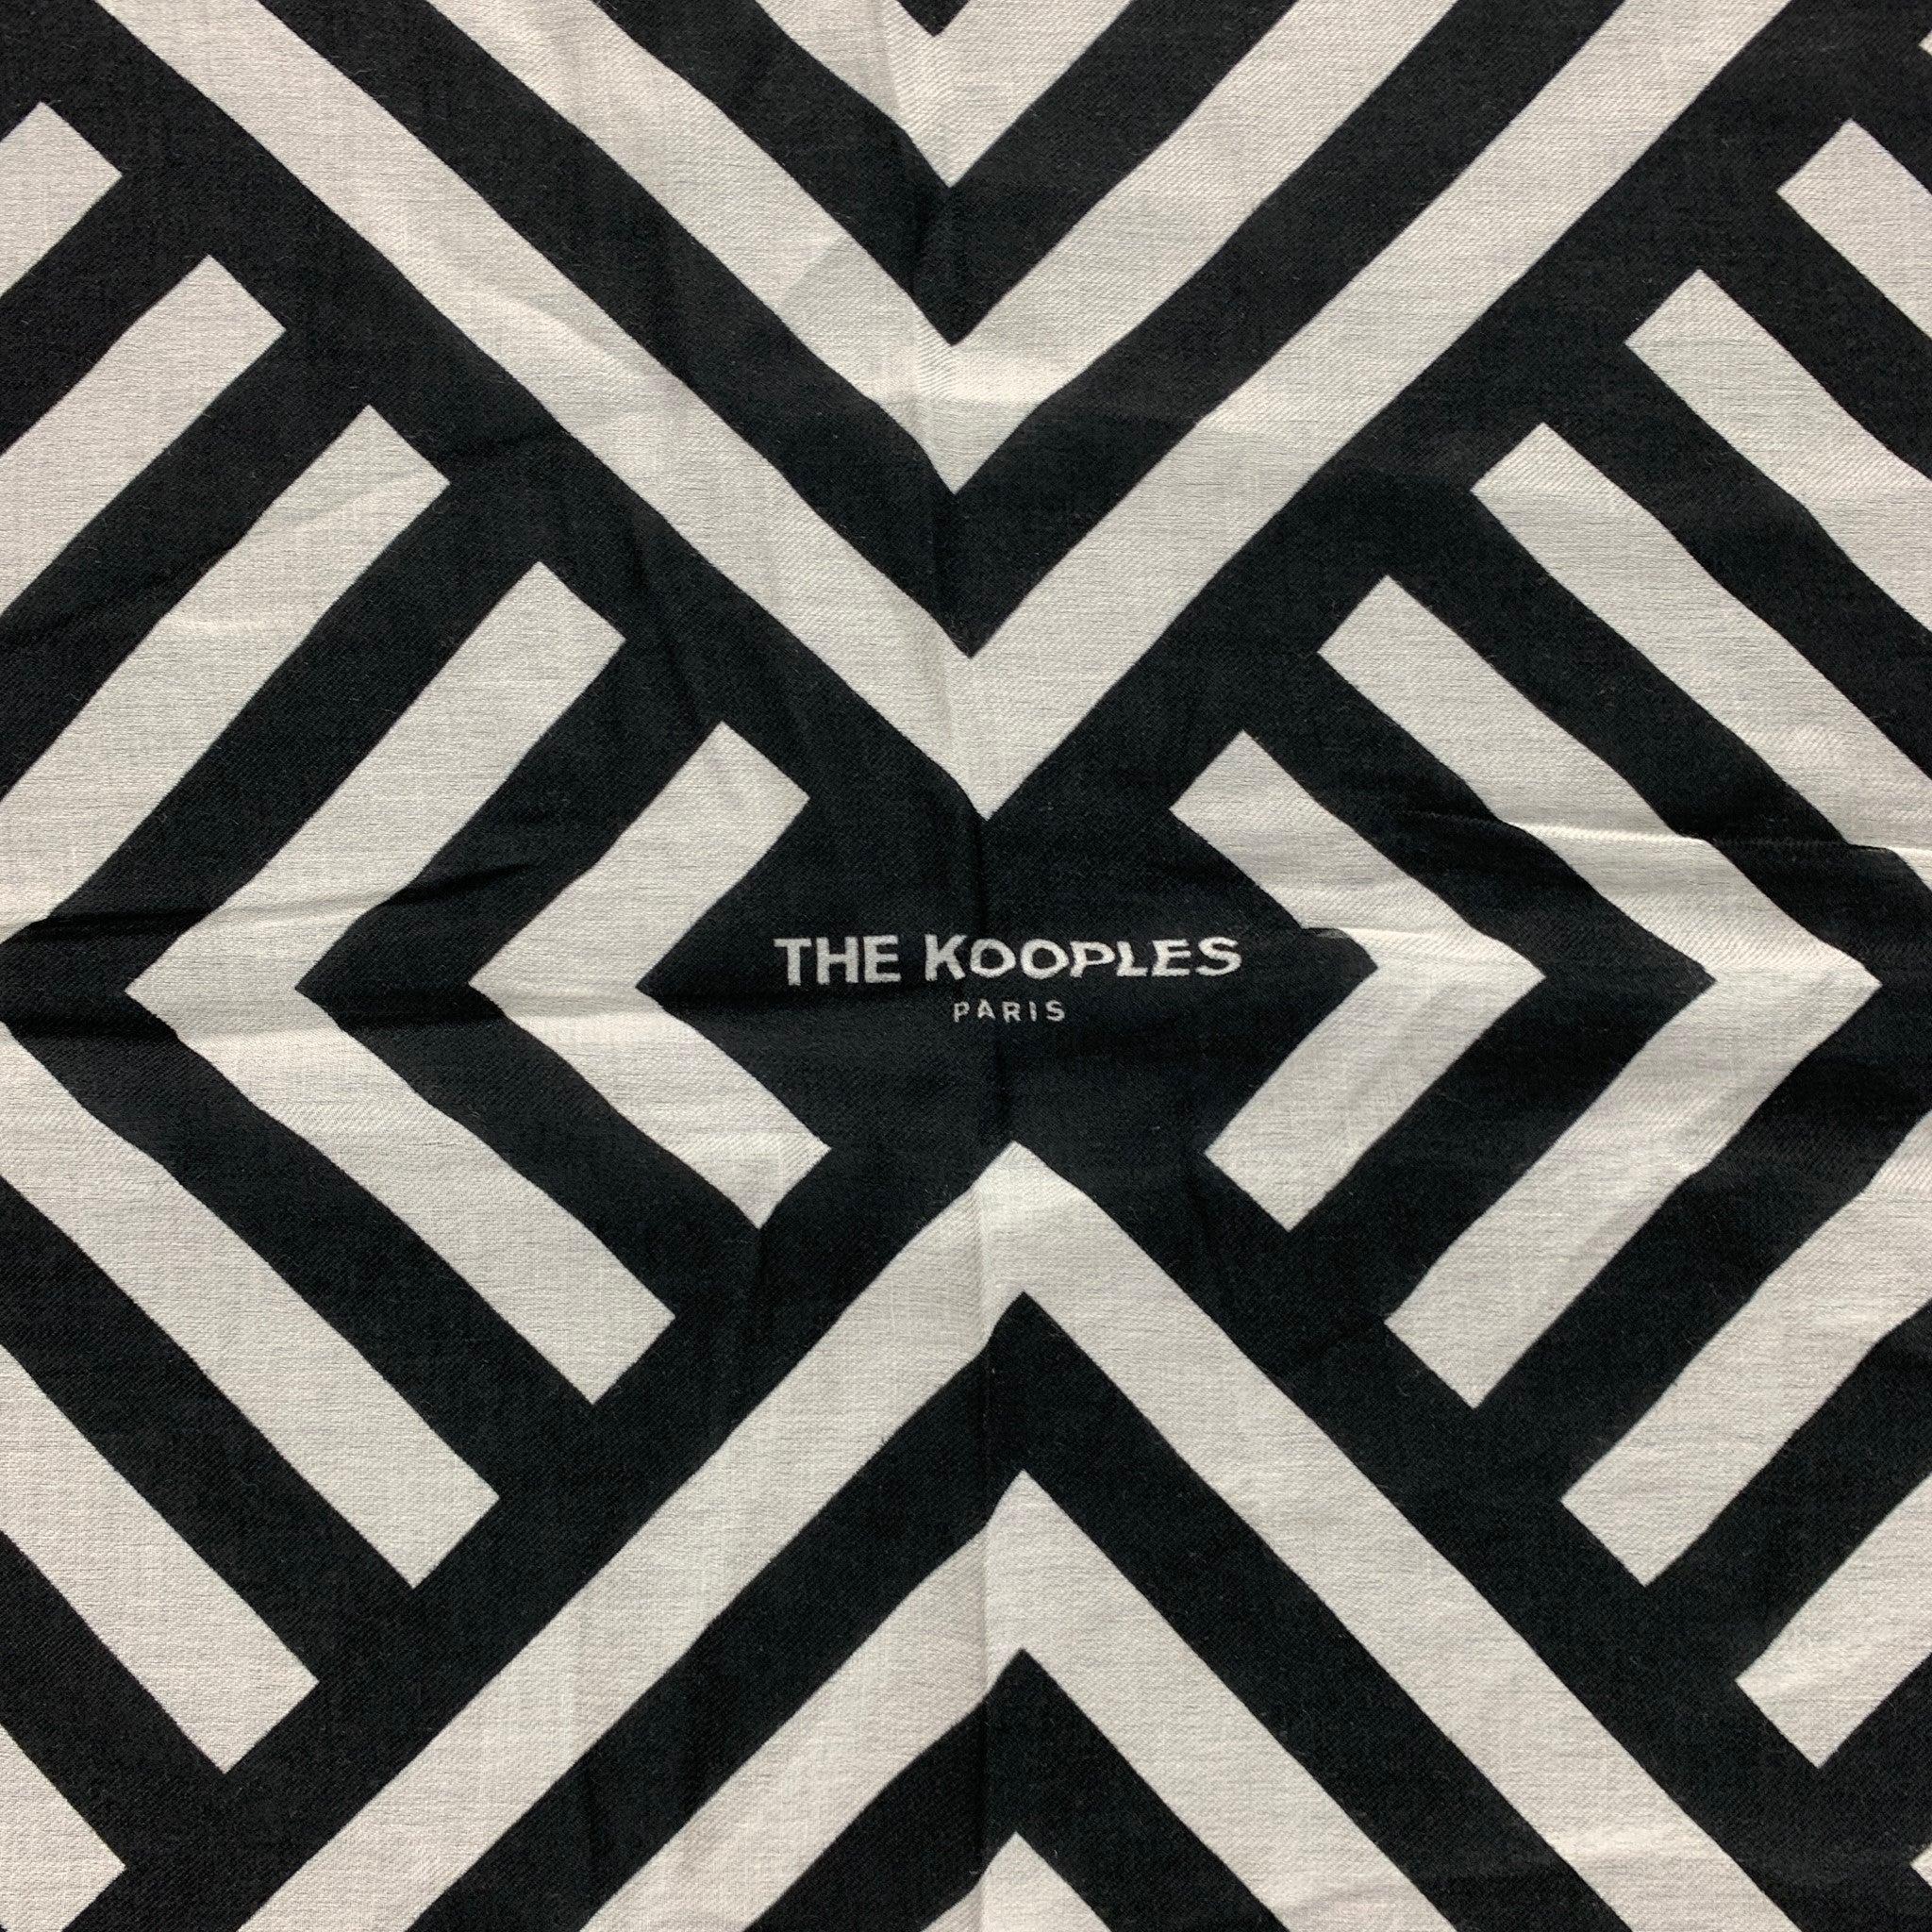 THE KOOPLES Black White Stripe Scarf In Excellent Condition For Sale In San Francisco, CA